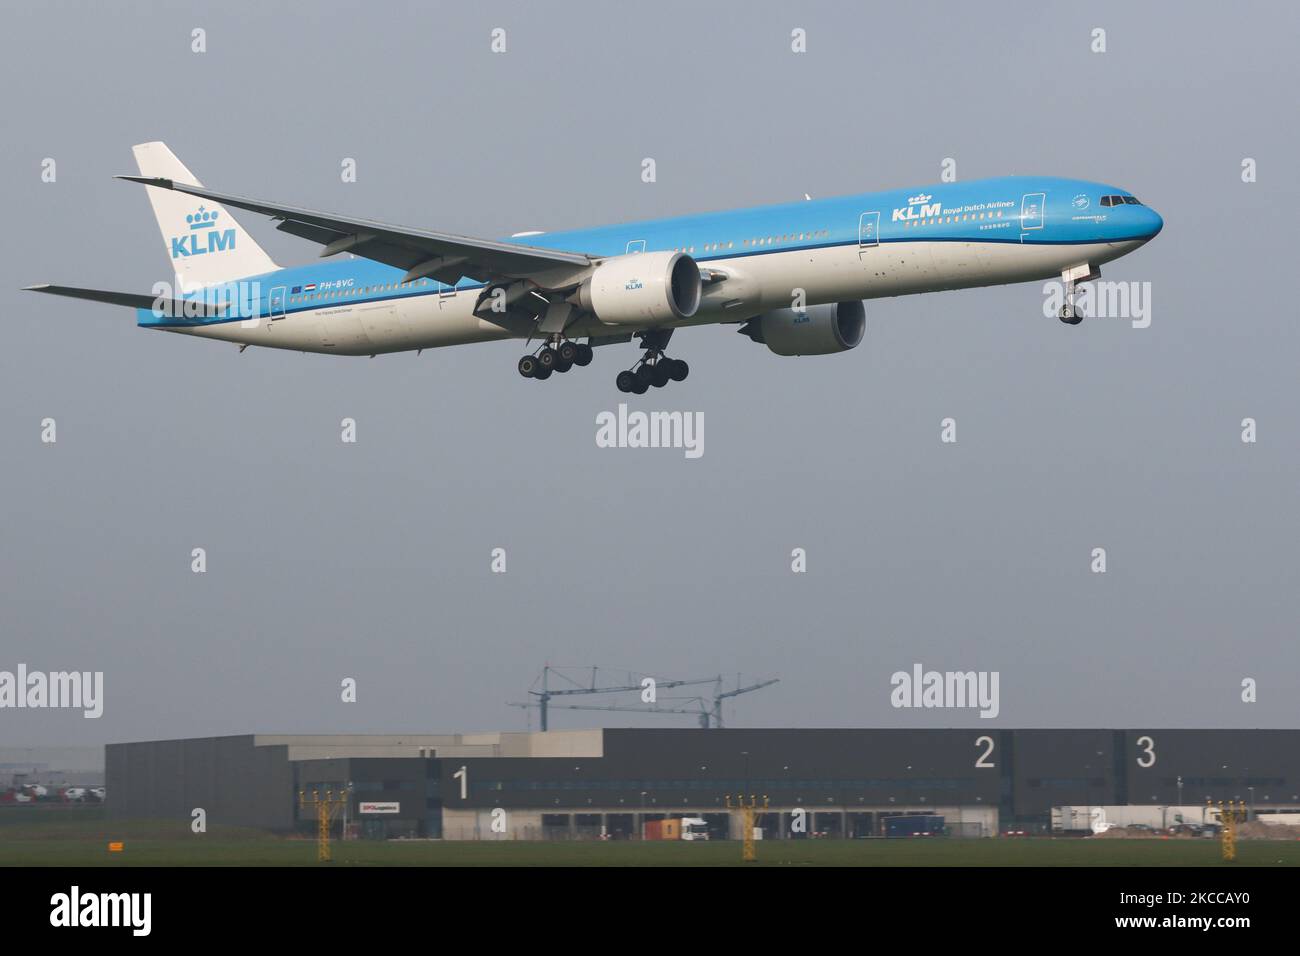 KLM Royal Dutch Airlones Boeing 777-300 aircraft as seen flying on final approach for landing at Amsterdam Schiphol AMS EHAM international airport. The wide body airplane made for long haul flights has the registration PH-BVG, the name Nationaal Park Wolong / Wolong National Nature Reserve and is powered by 2x GE jet engines. KLM Koninklijke Luchtvaart Maatschappij N.V. is the flag carrier of the Netherlands with hub in Amsterdam, the airline is the oldest in the world, member of SkyTeam aviation alliance and is owned by Air France - KLM Group. According to local and international media in Apr Stock Photo